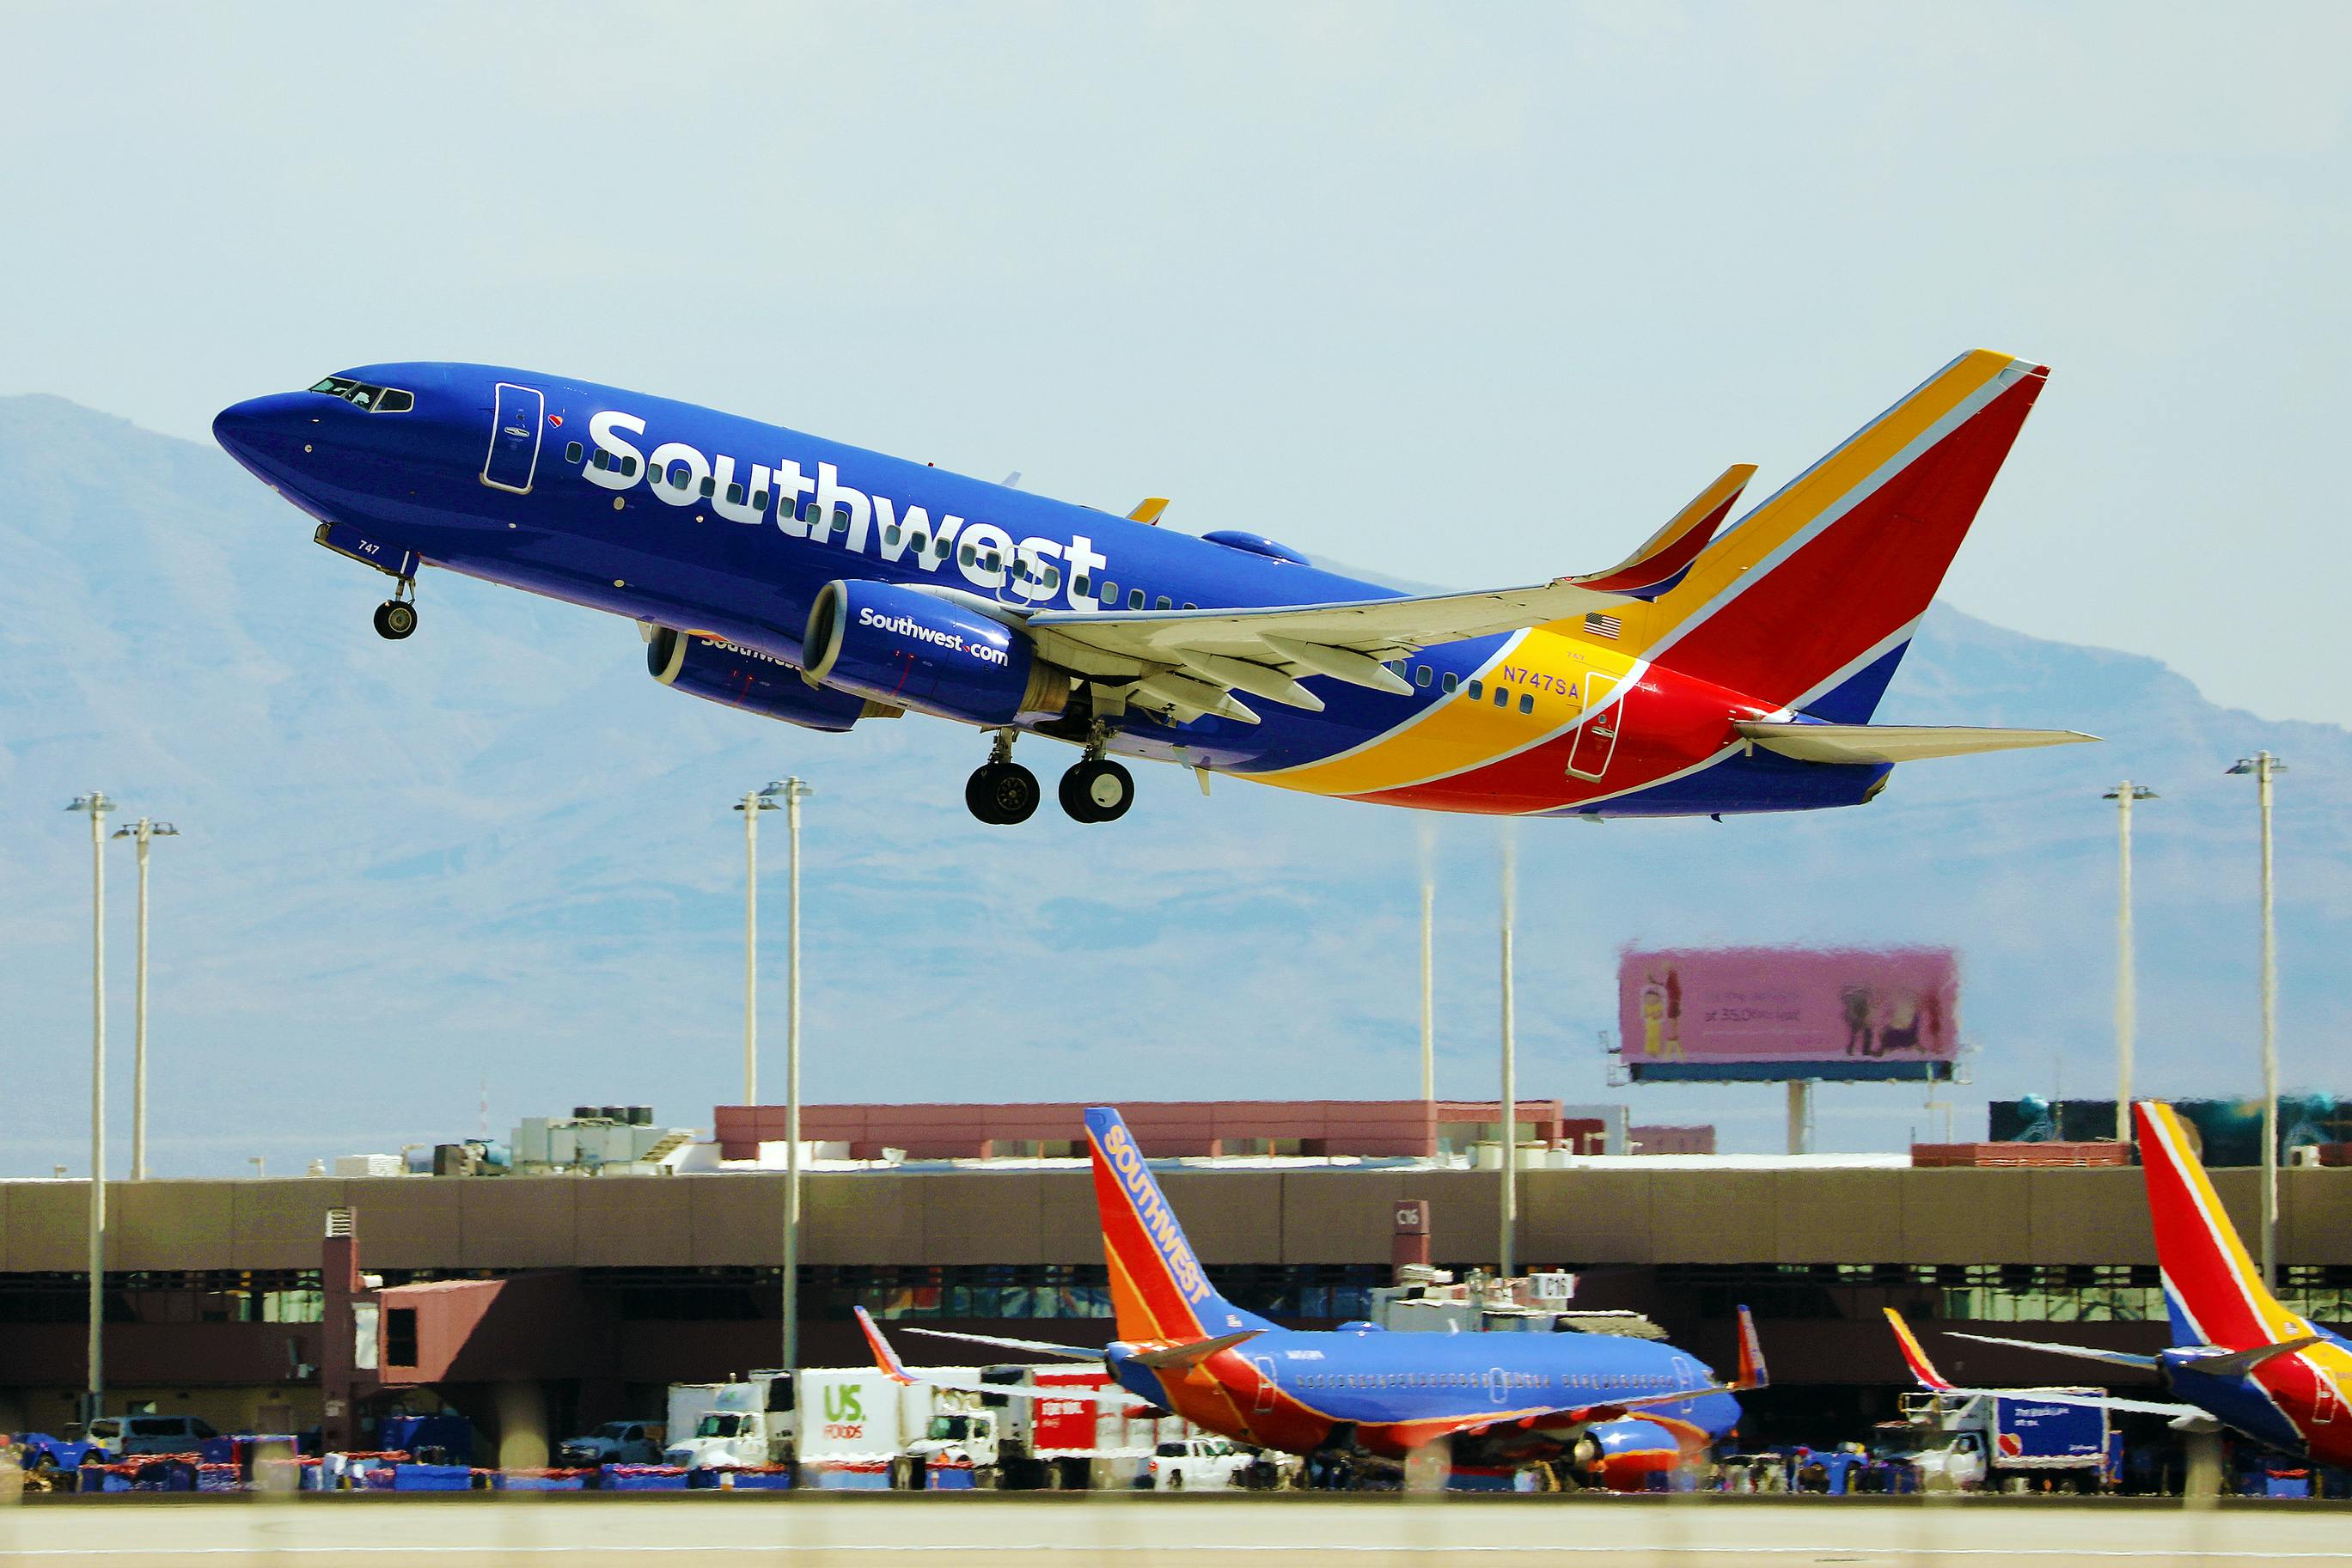 Get Cheap Flights During the Southwest Fall and Winter Sale